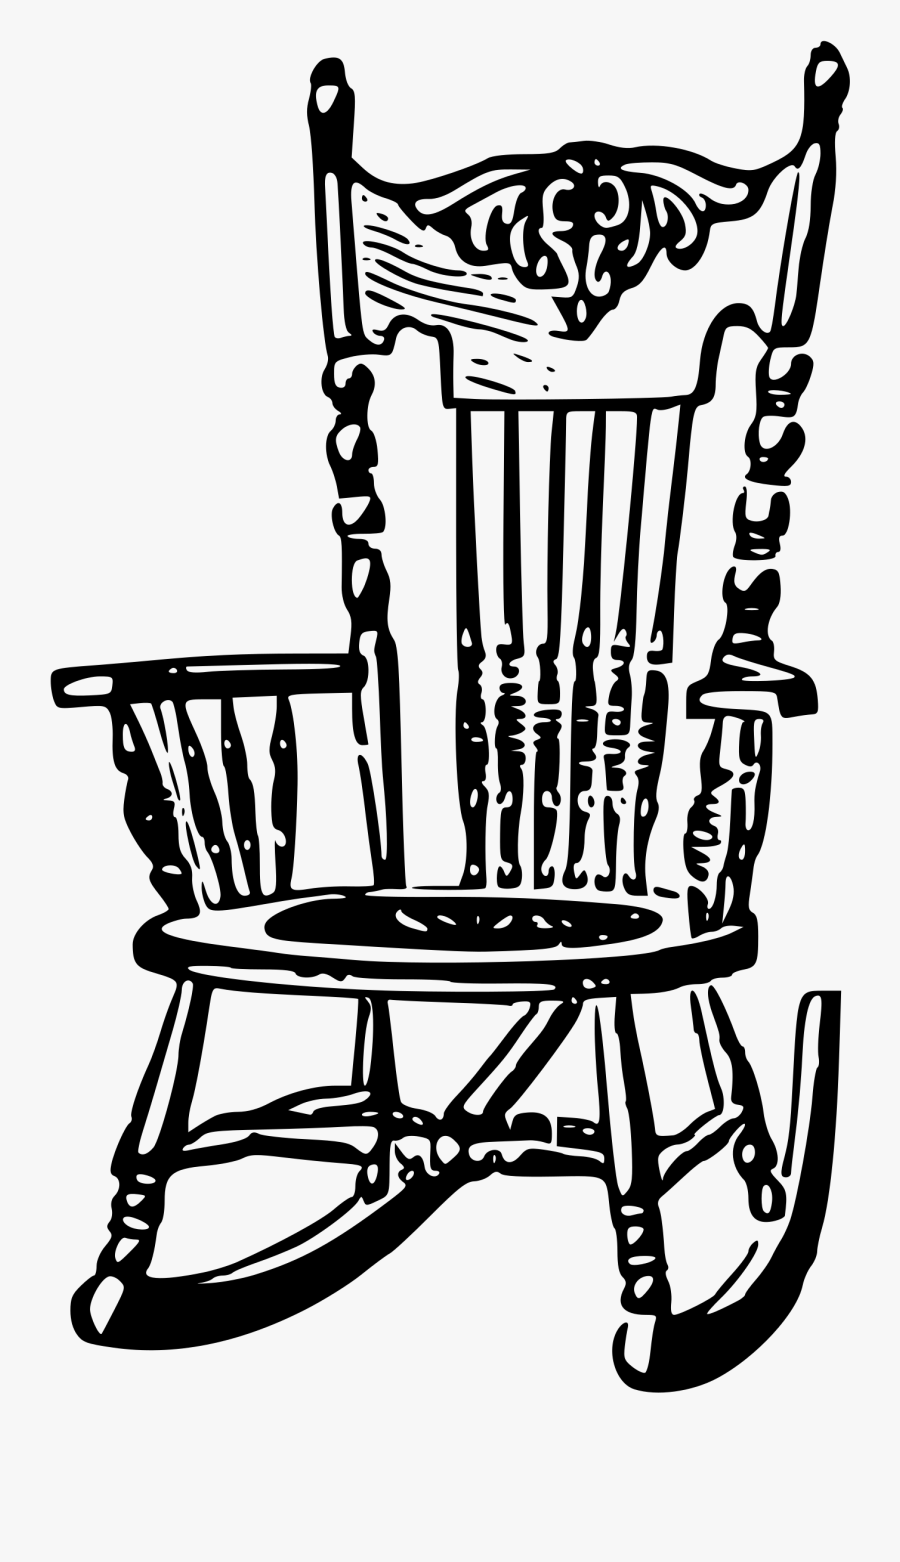 Free Clipart Rocking Chair - Rock And Roll Rocking Chair, Transparent Clipart